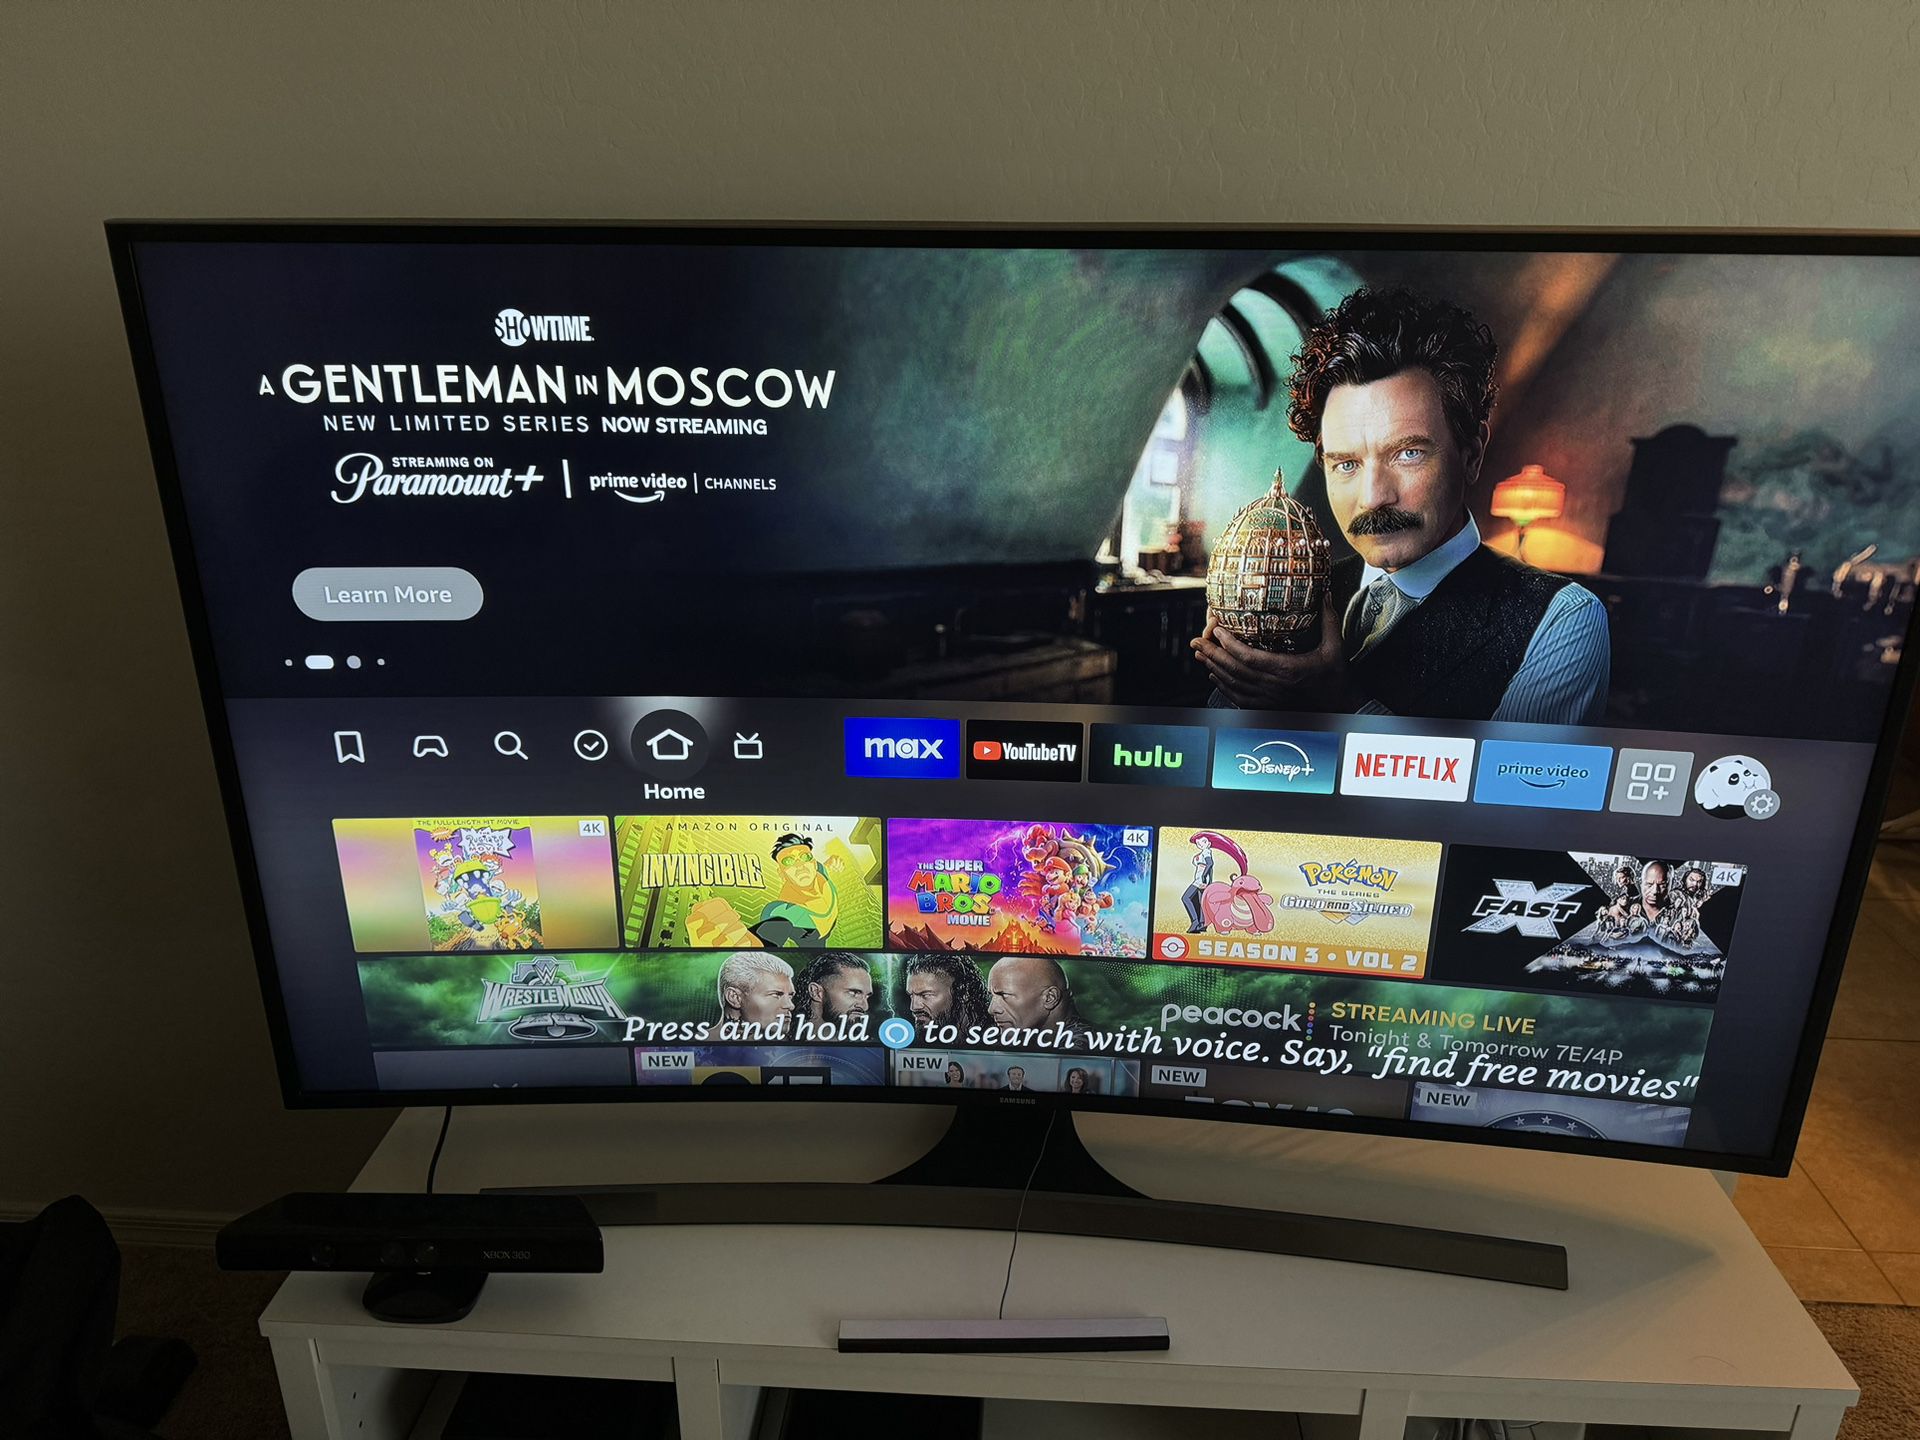 55 inch Samsung curved TV